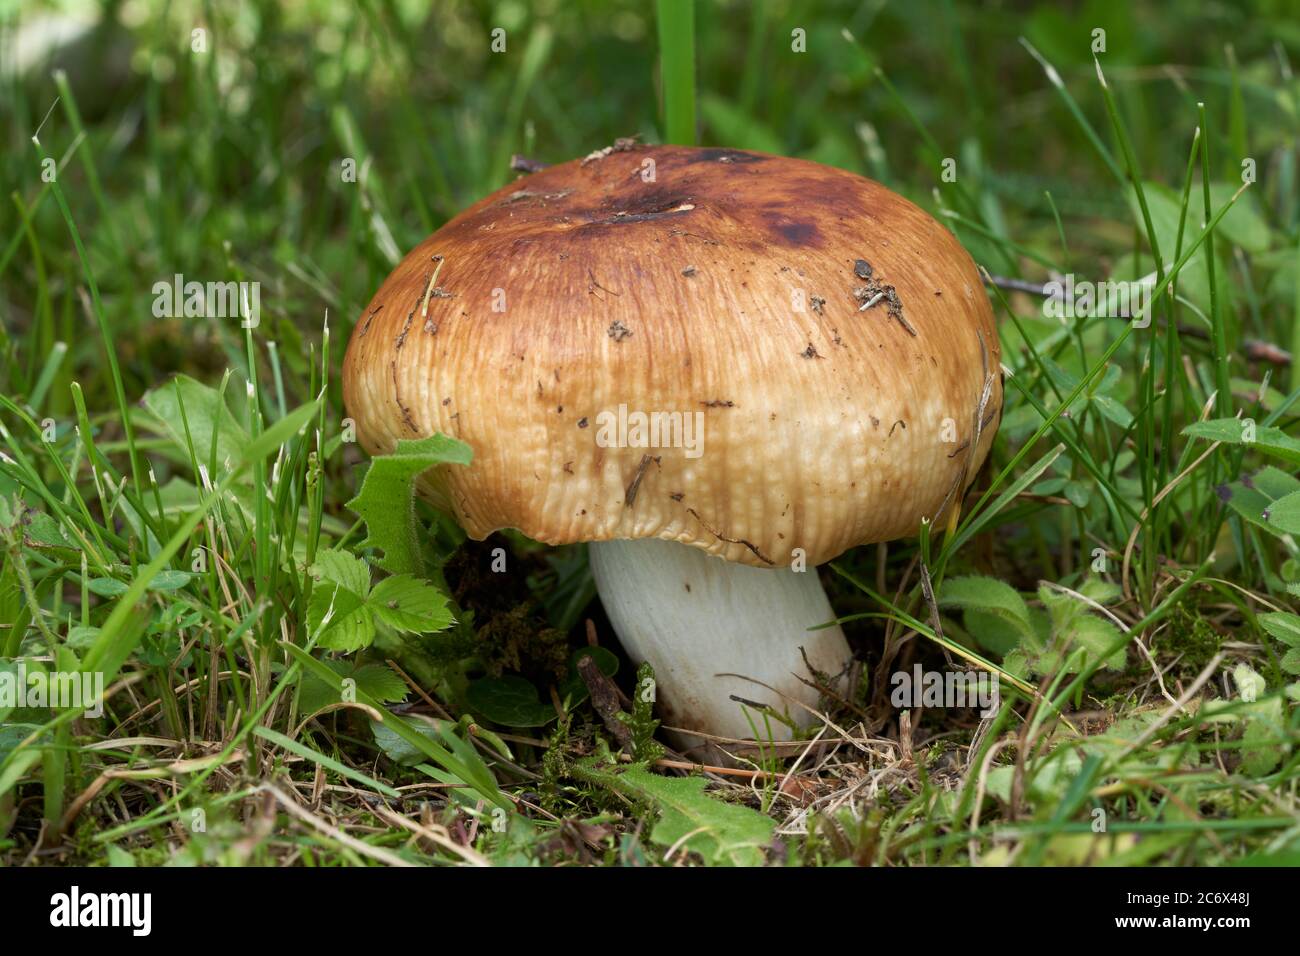 Inedible mushroom Russula foetens in the forest meadow. Known as stinking russula. Mushroom with honey yellow cup and white stem in the grass. Stock Photo